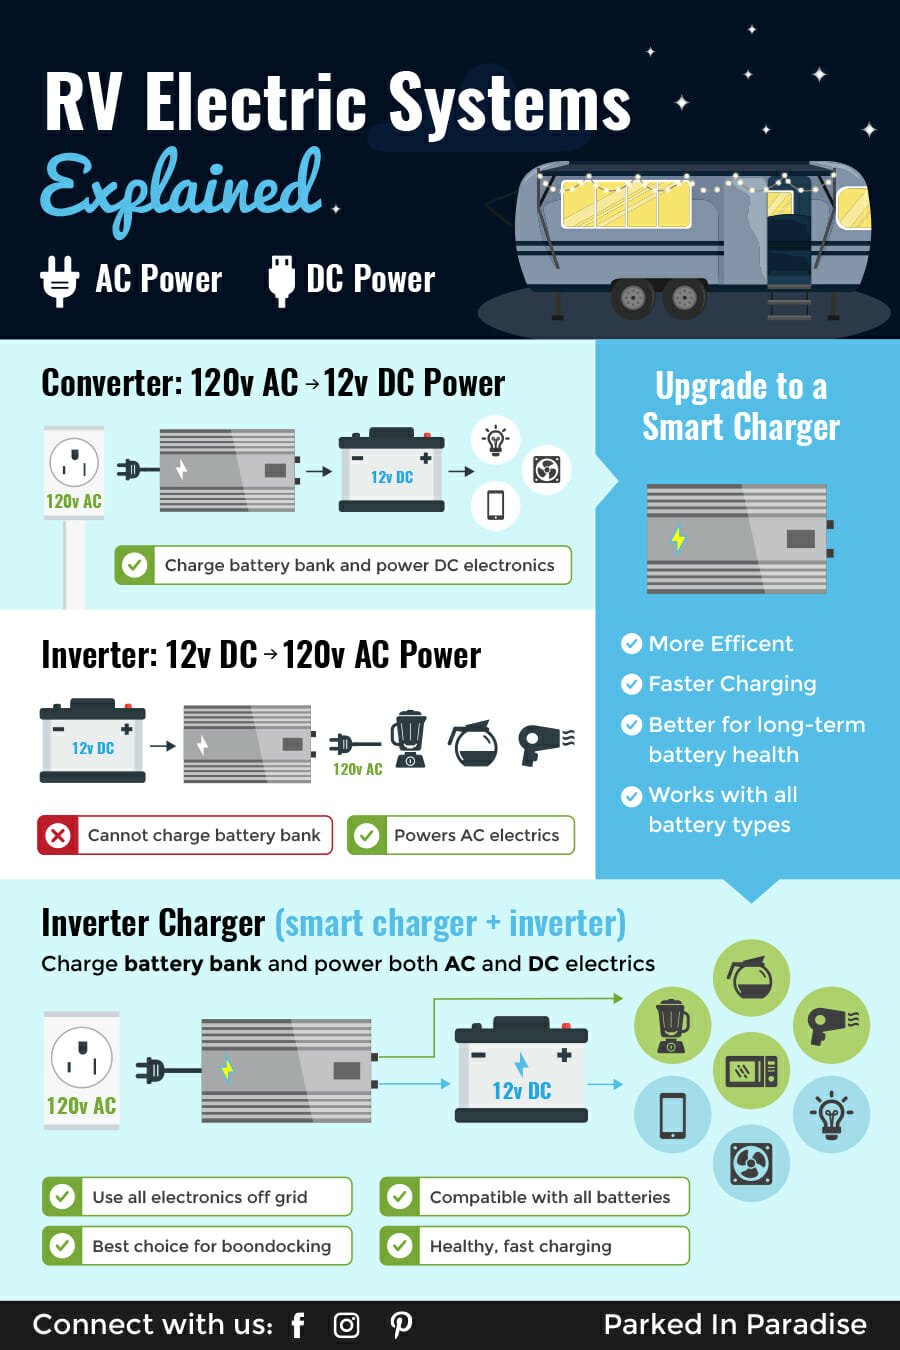 infographic showing the difference between a converter, smart charger, inverter and inverter charger in an RV electric system